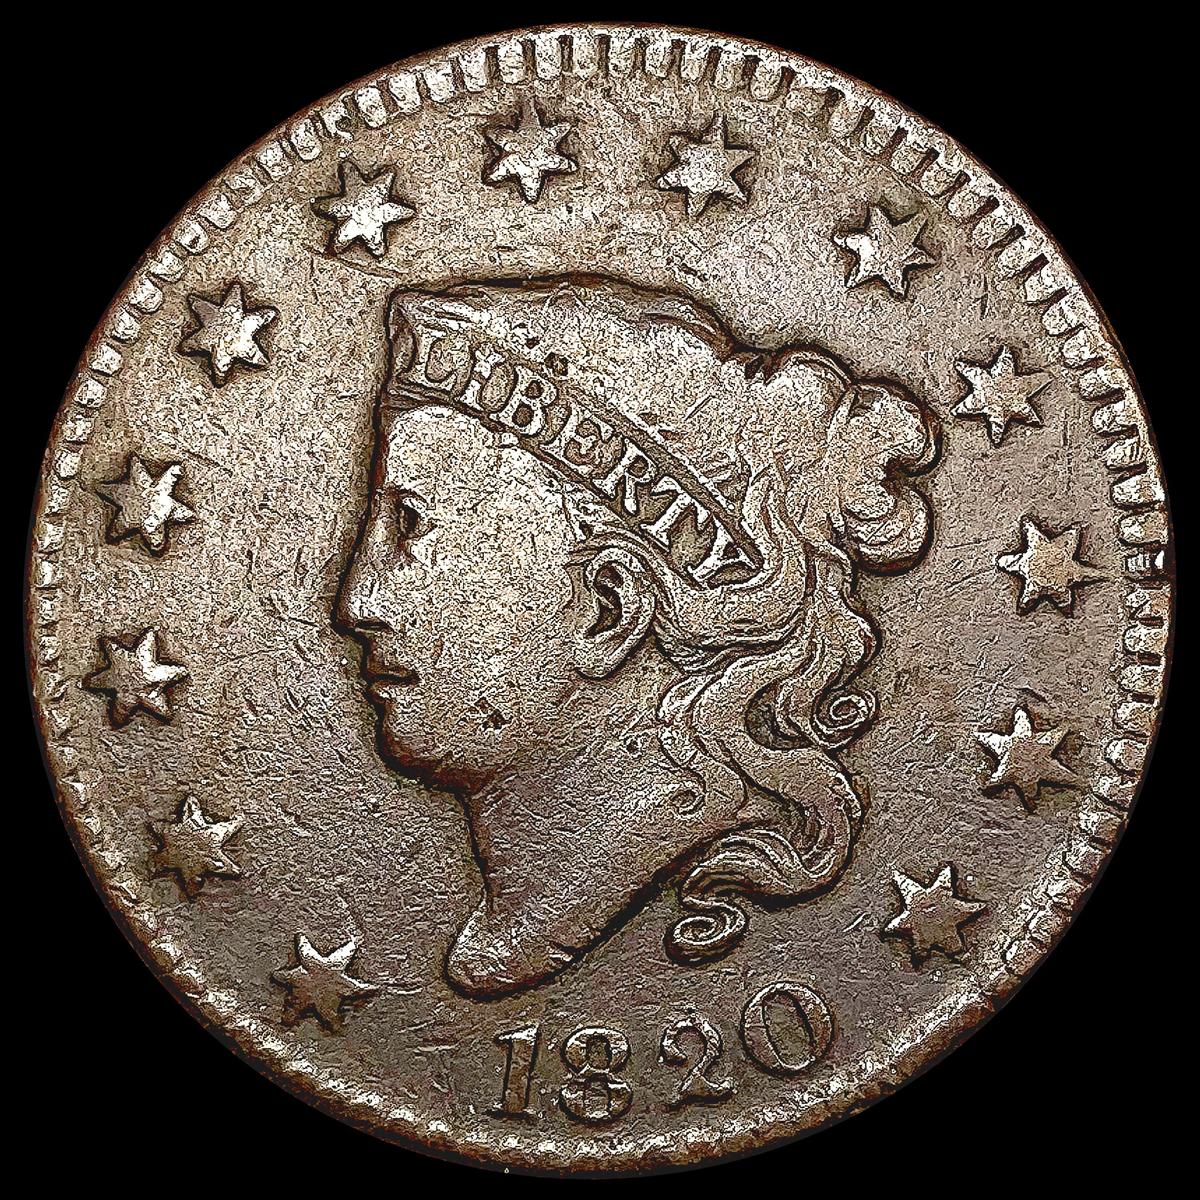 1820 Coronet Head Large Cent NICELY CIRCULATED